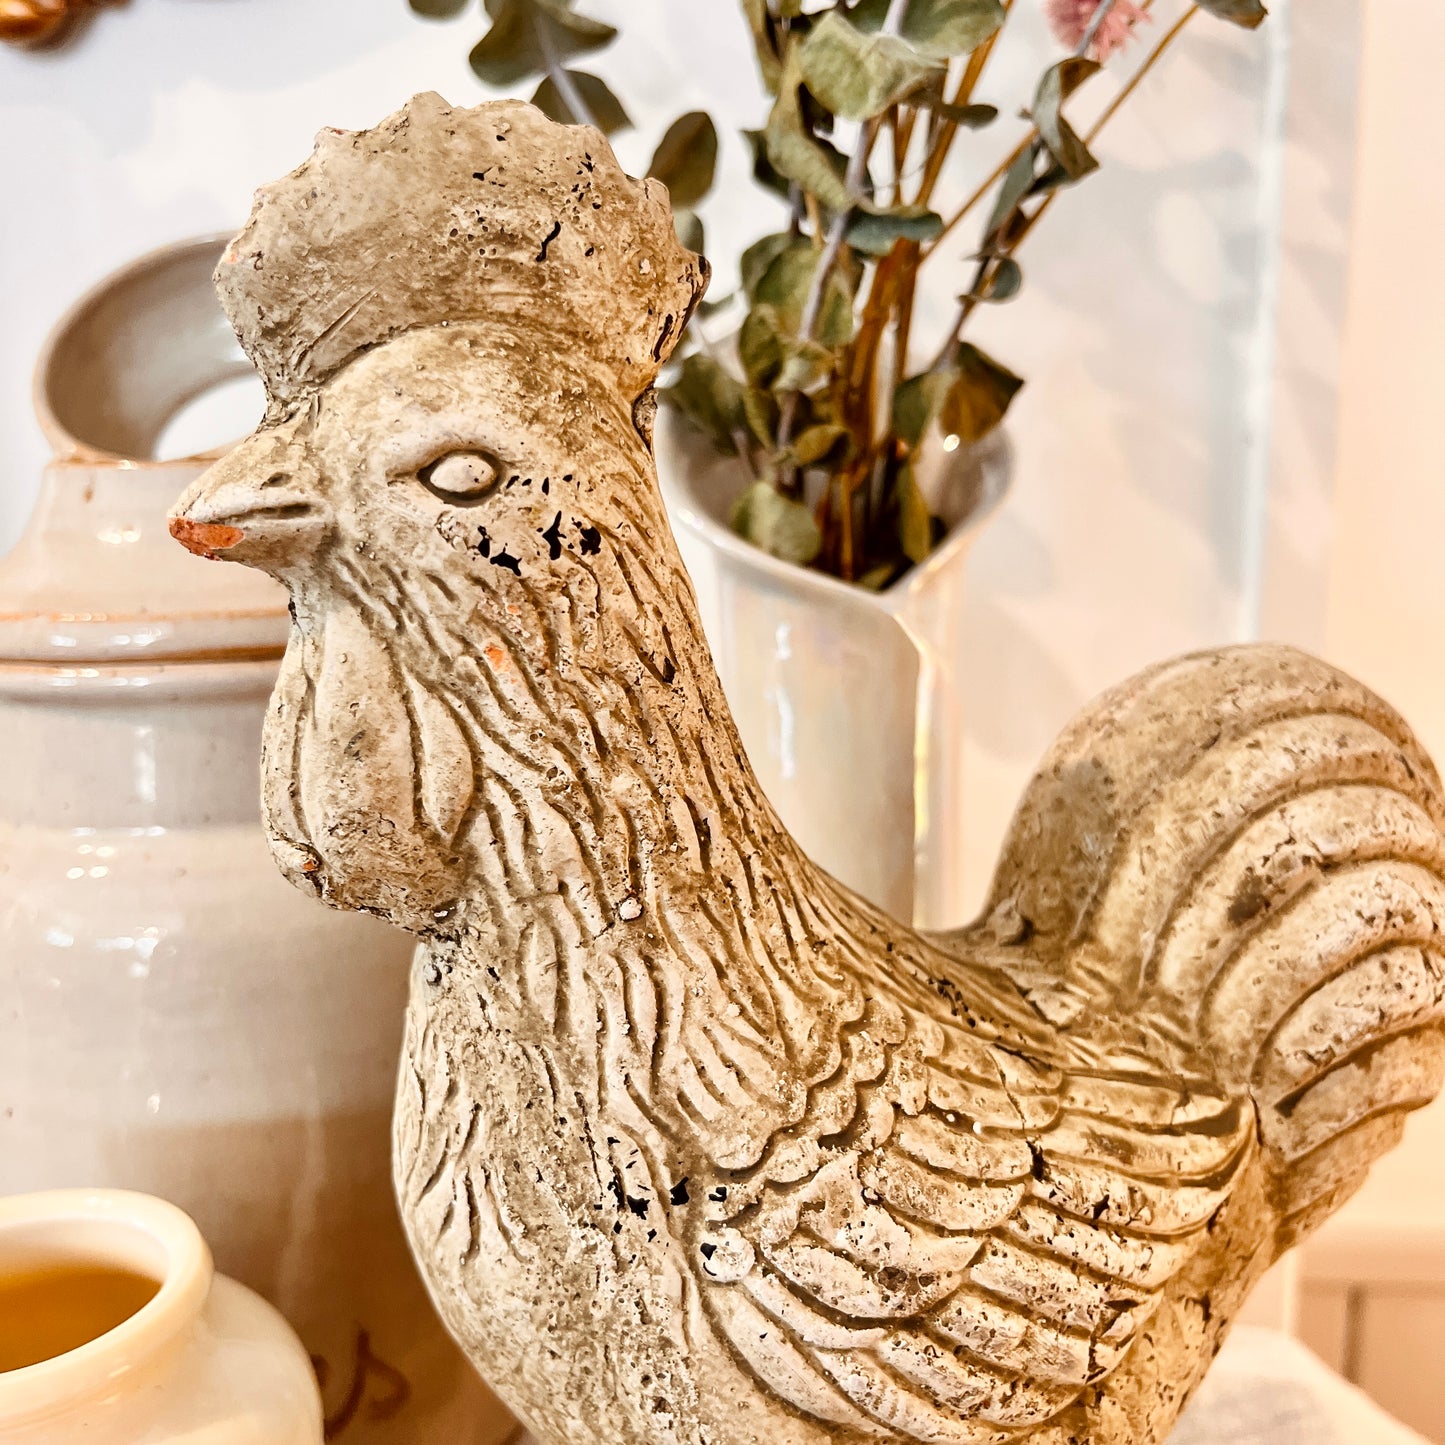 Rooster in terracotta